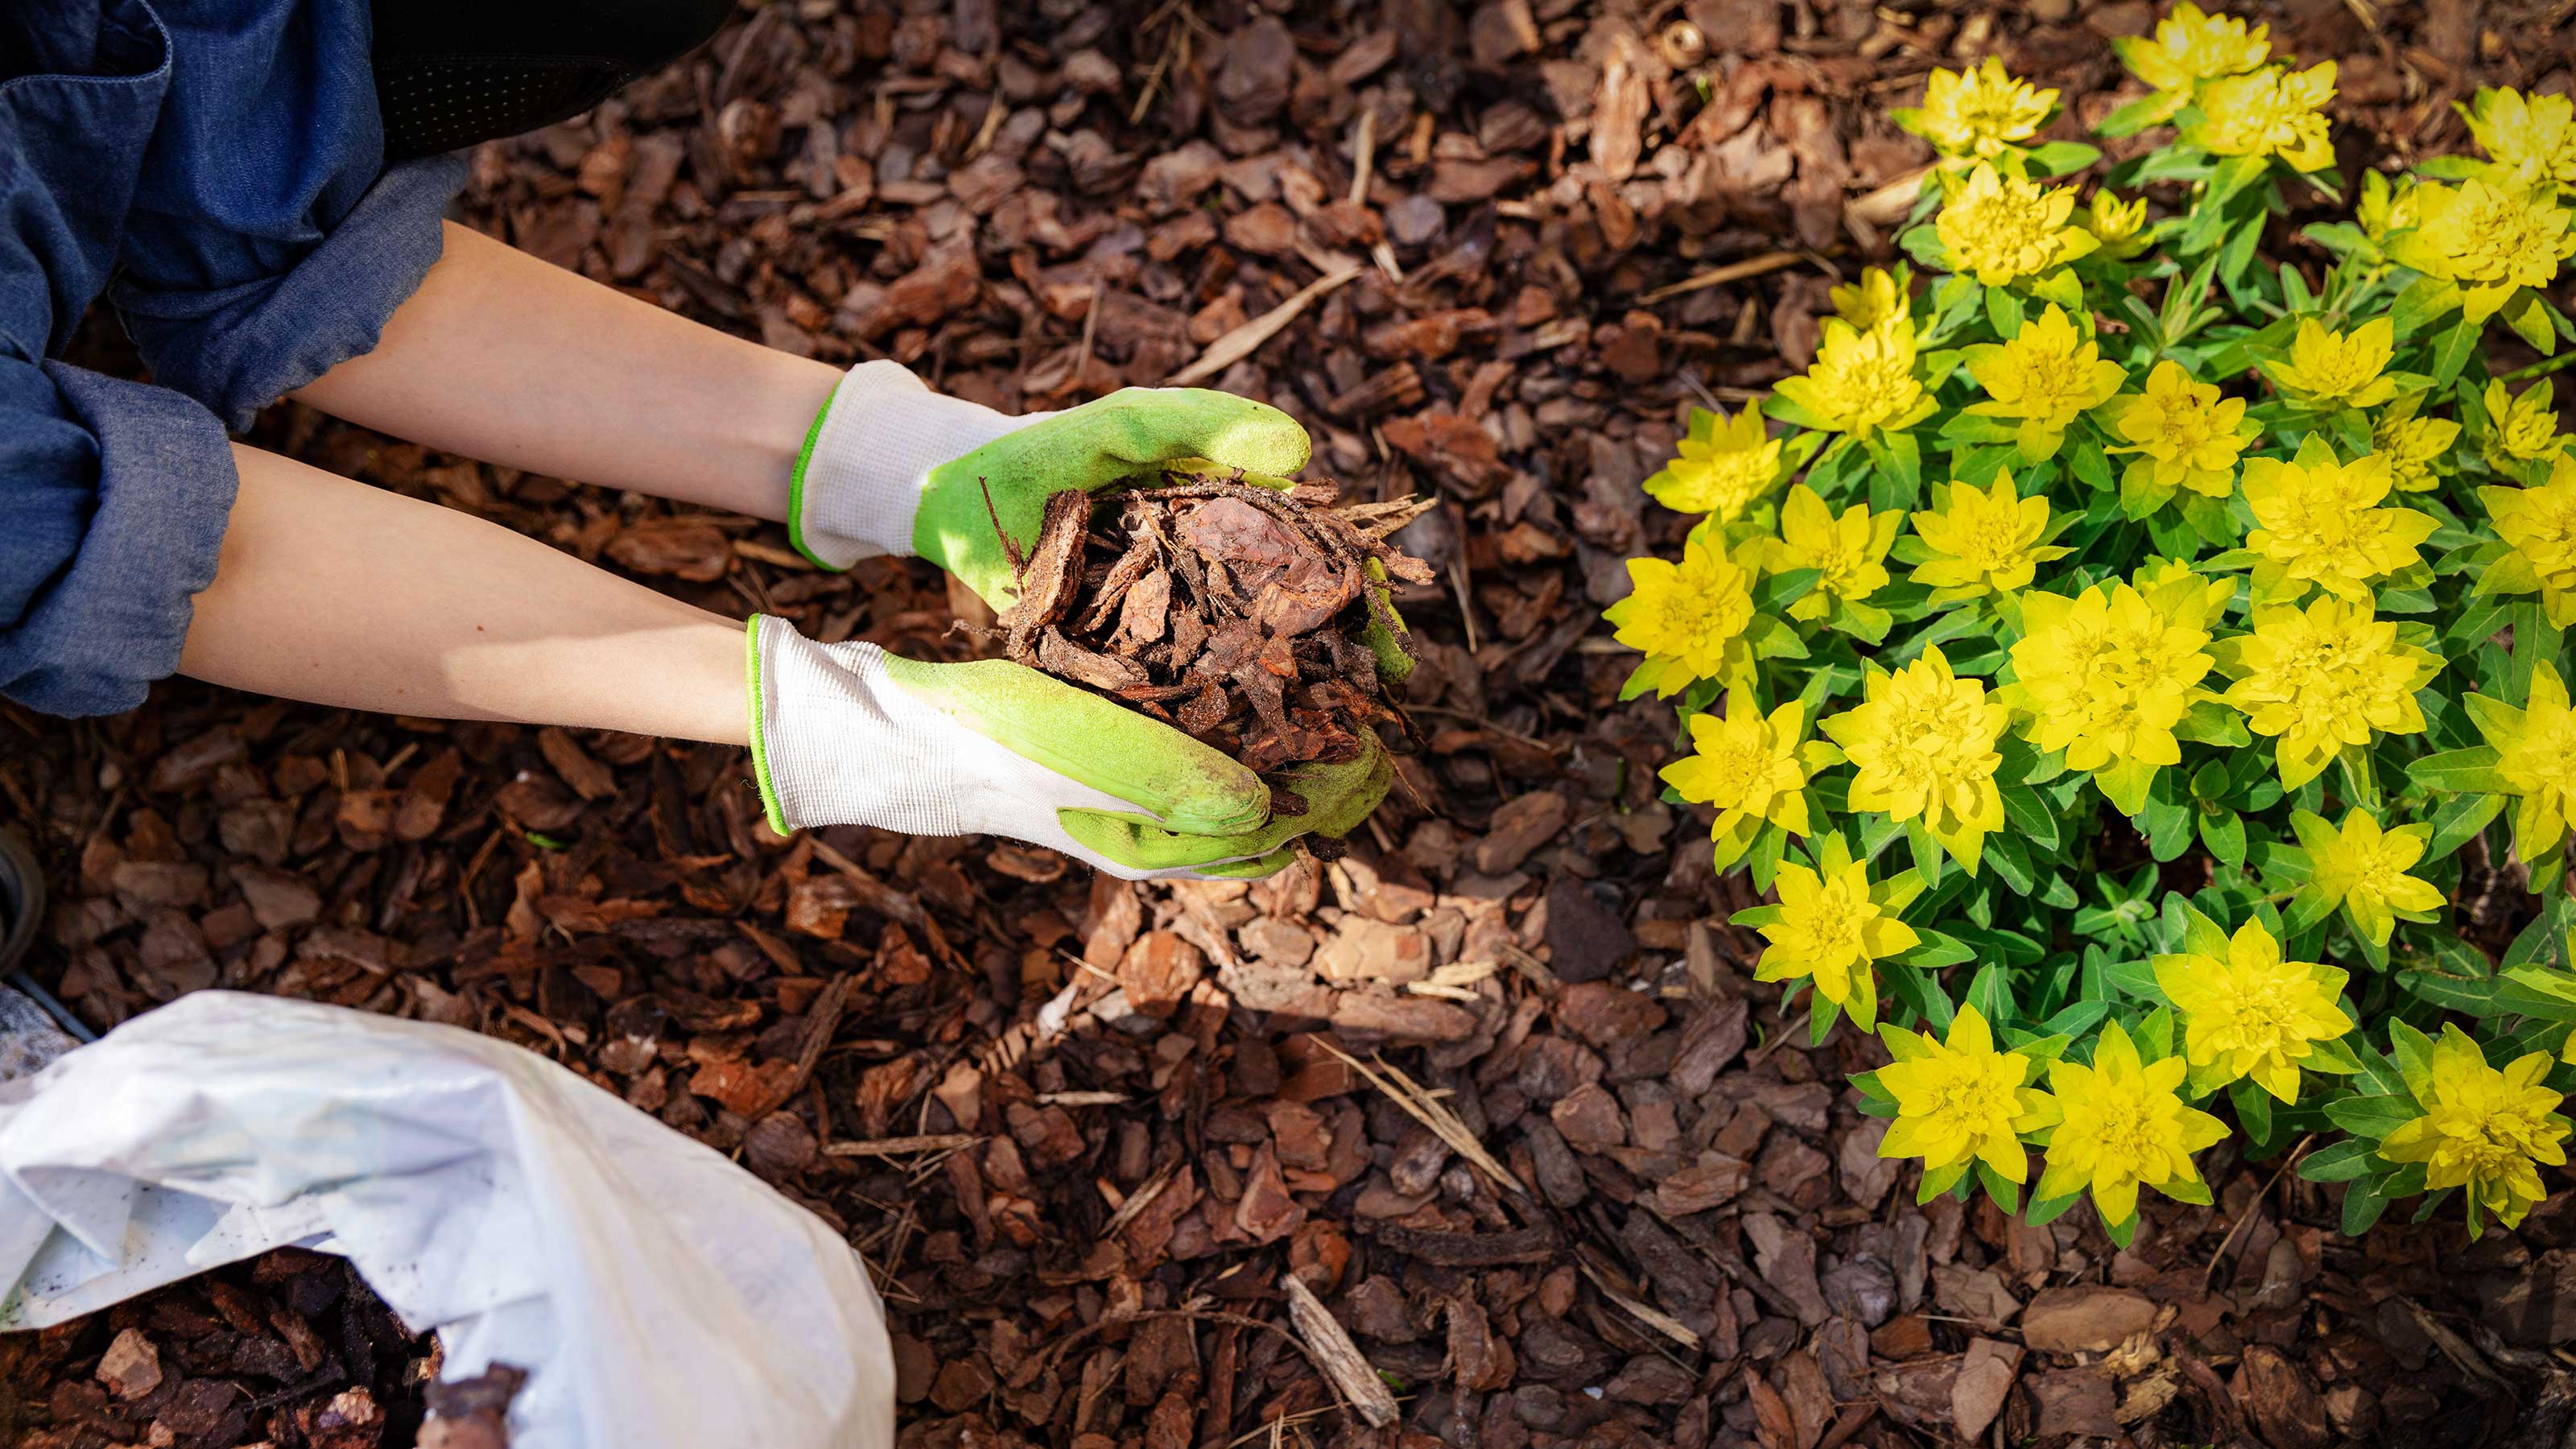 Cover the Exposed Roots With Mulch